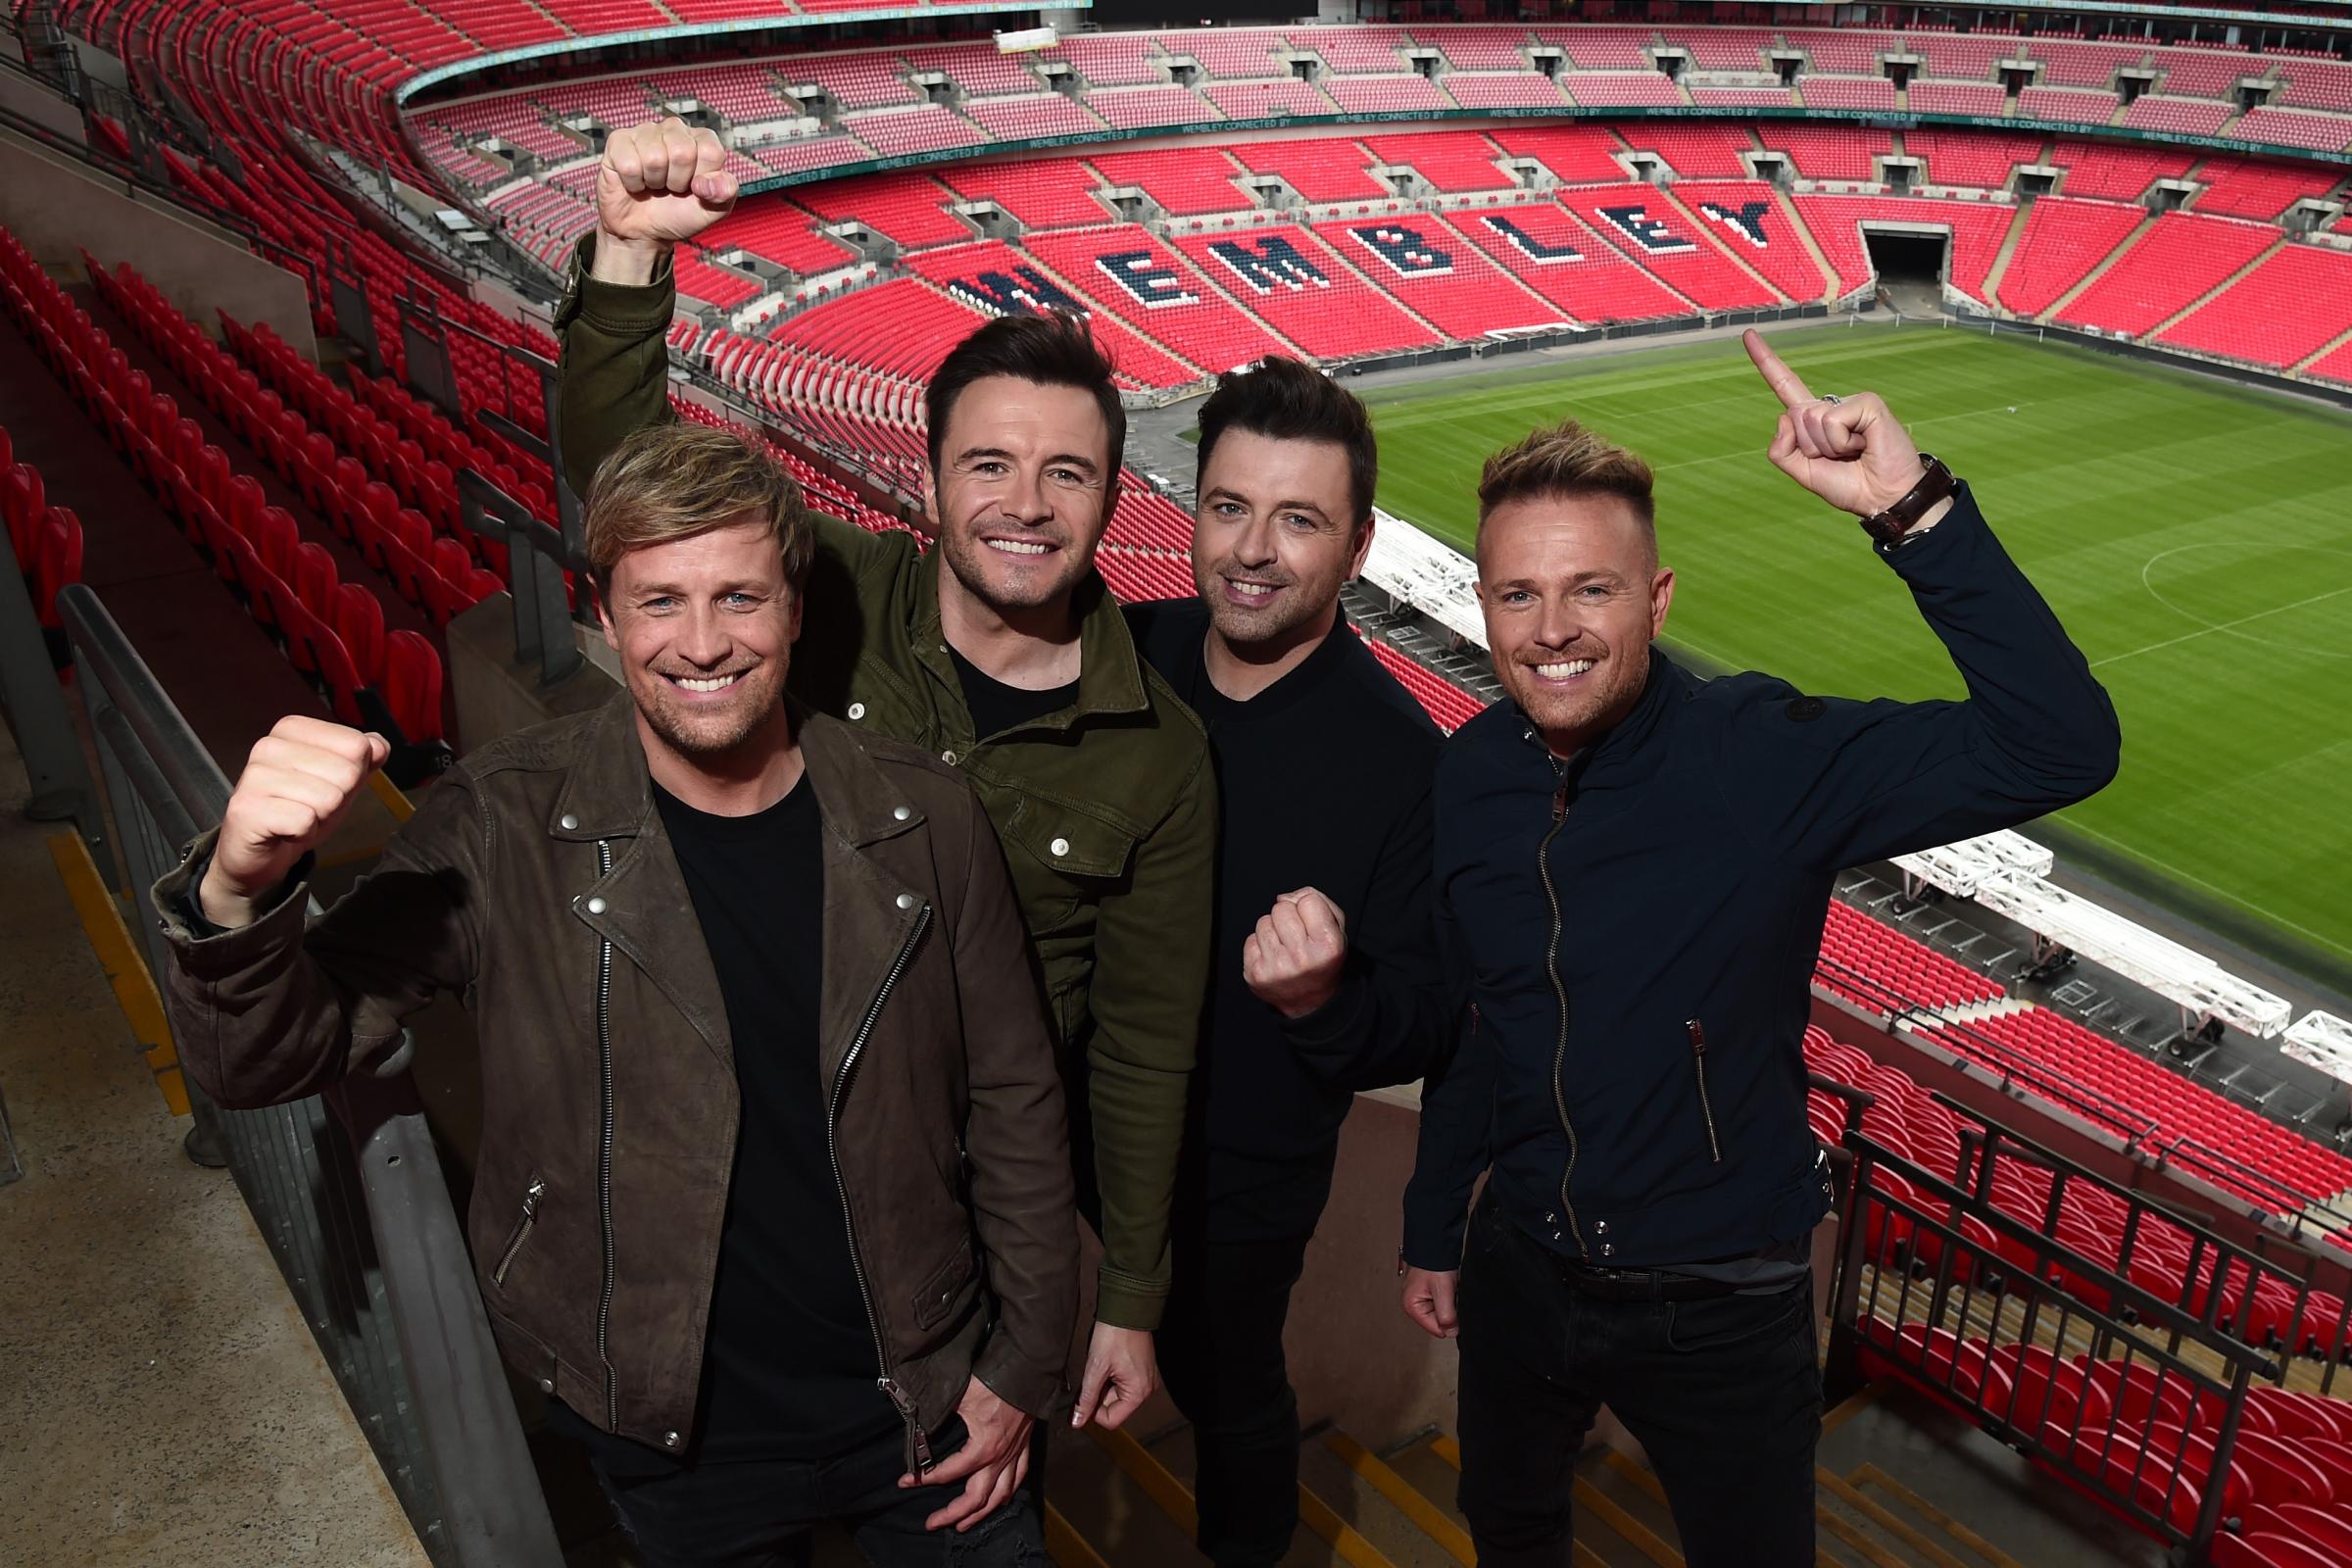 Could Westlife score their first number one album in more than a decade?